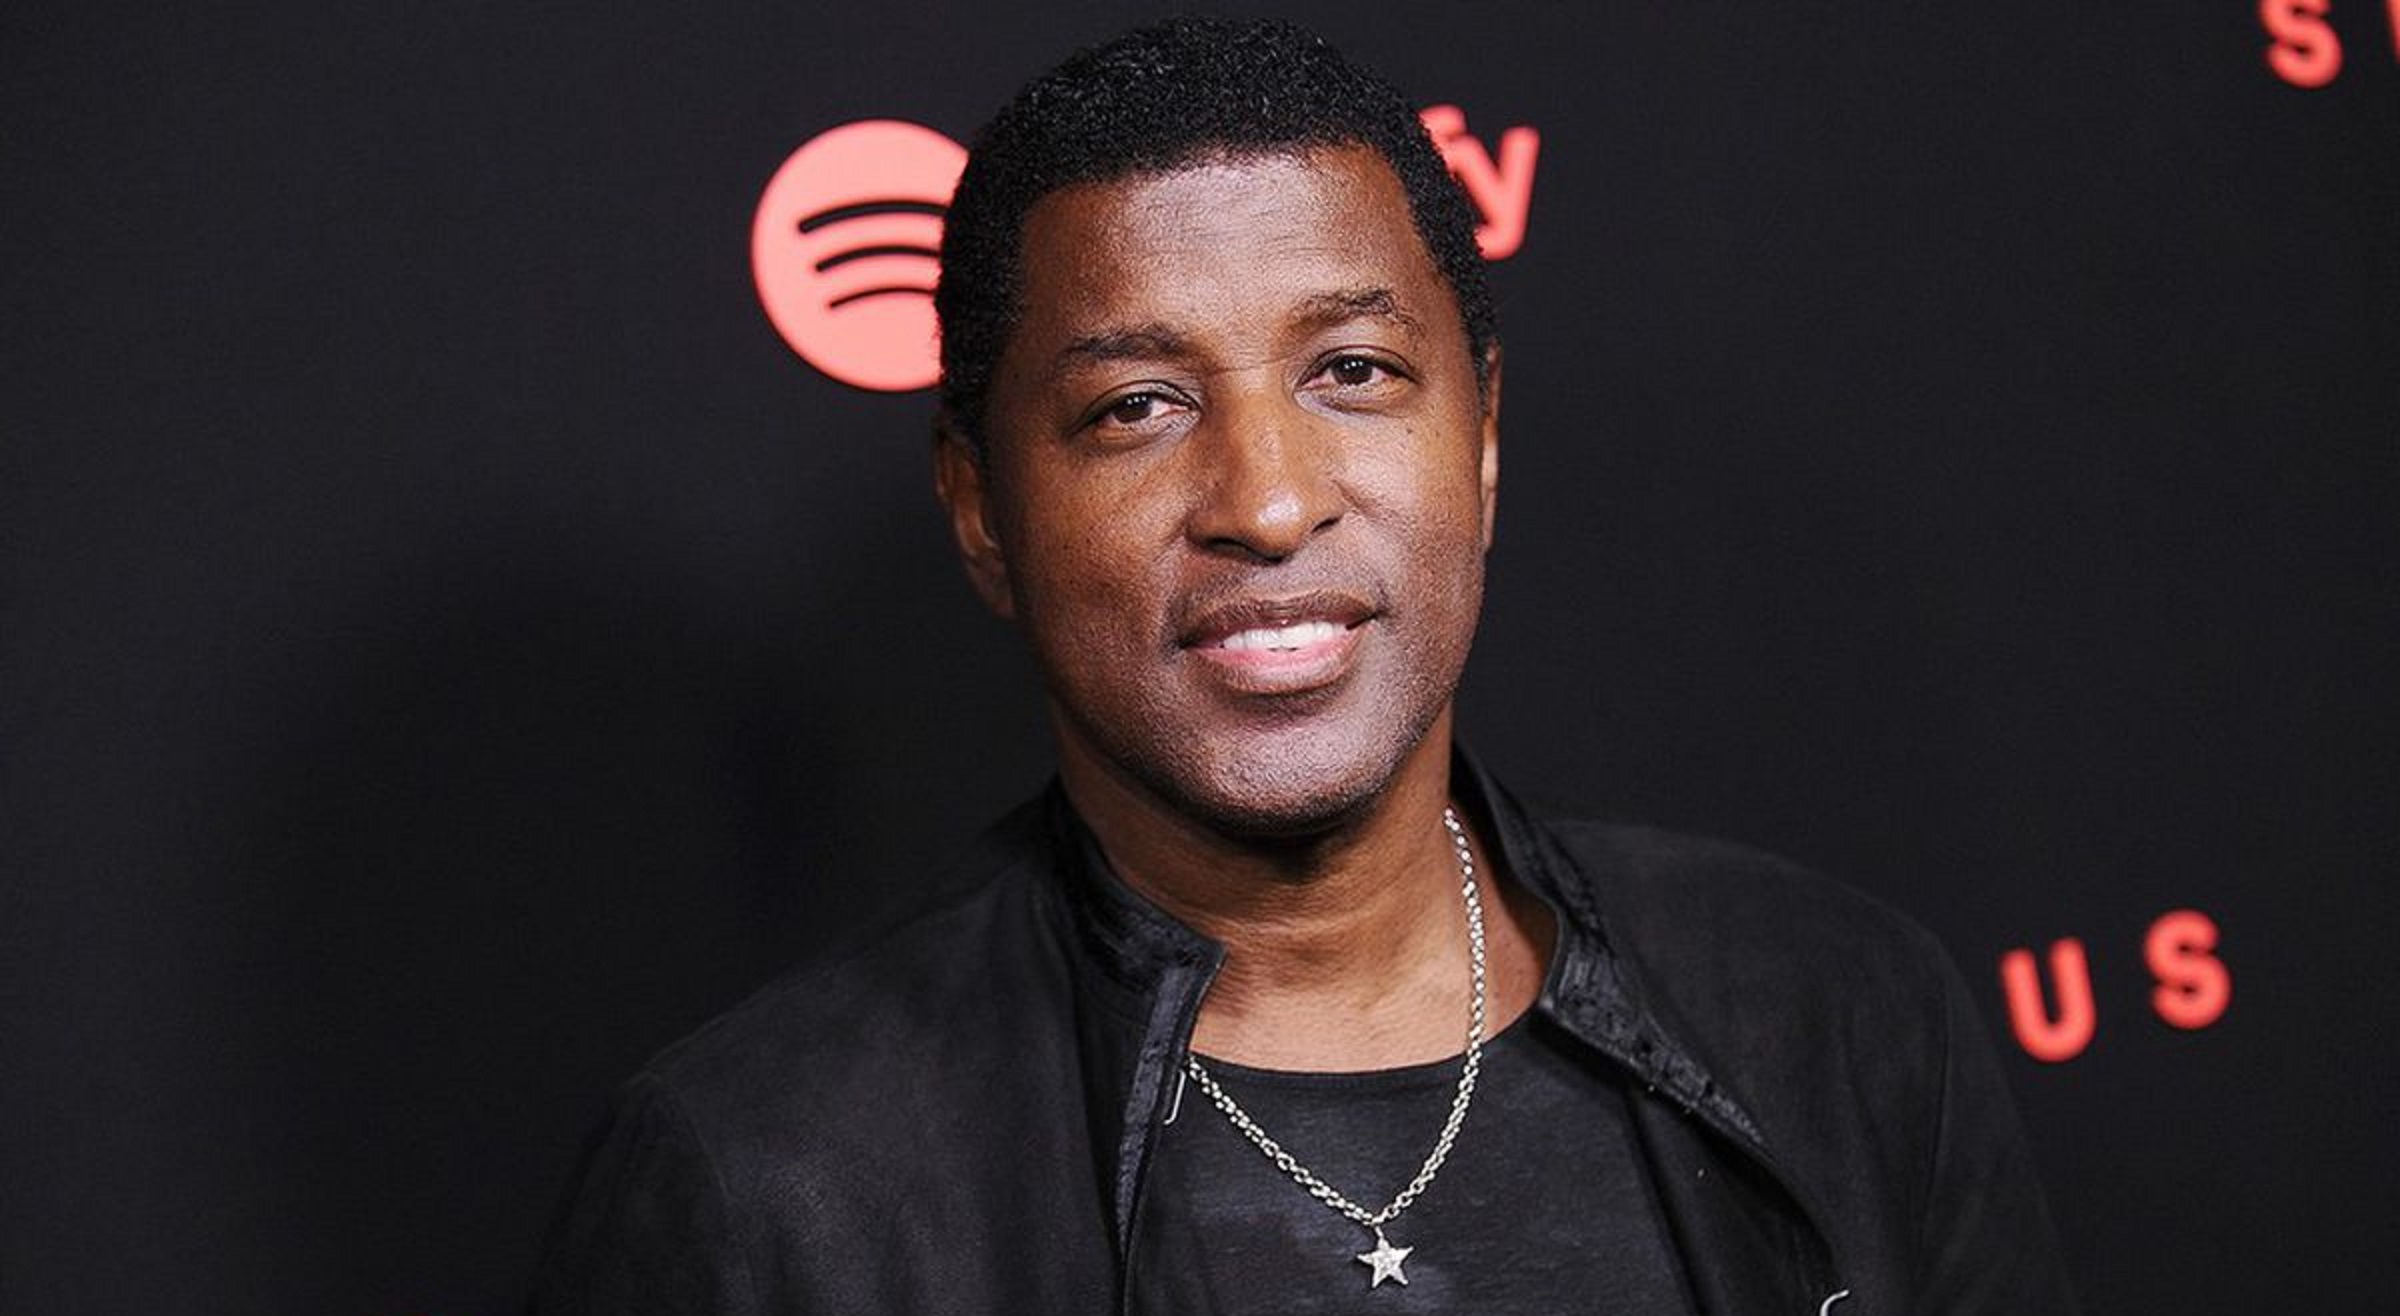 Babyface Tested Positive For Coronavirus, On Road To Recovery Now